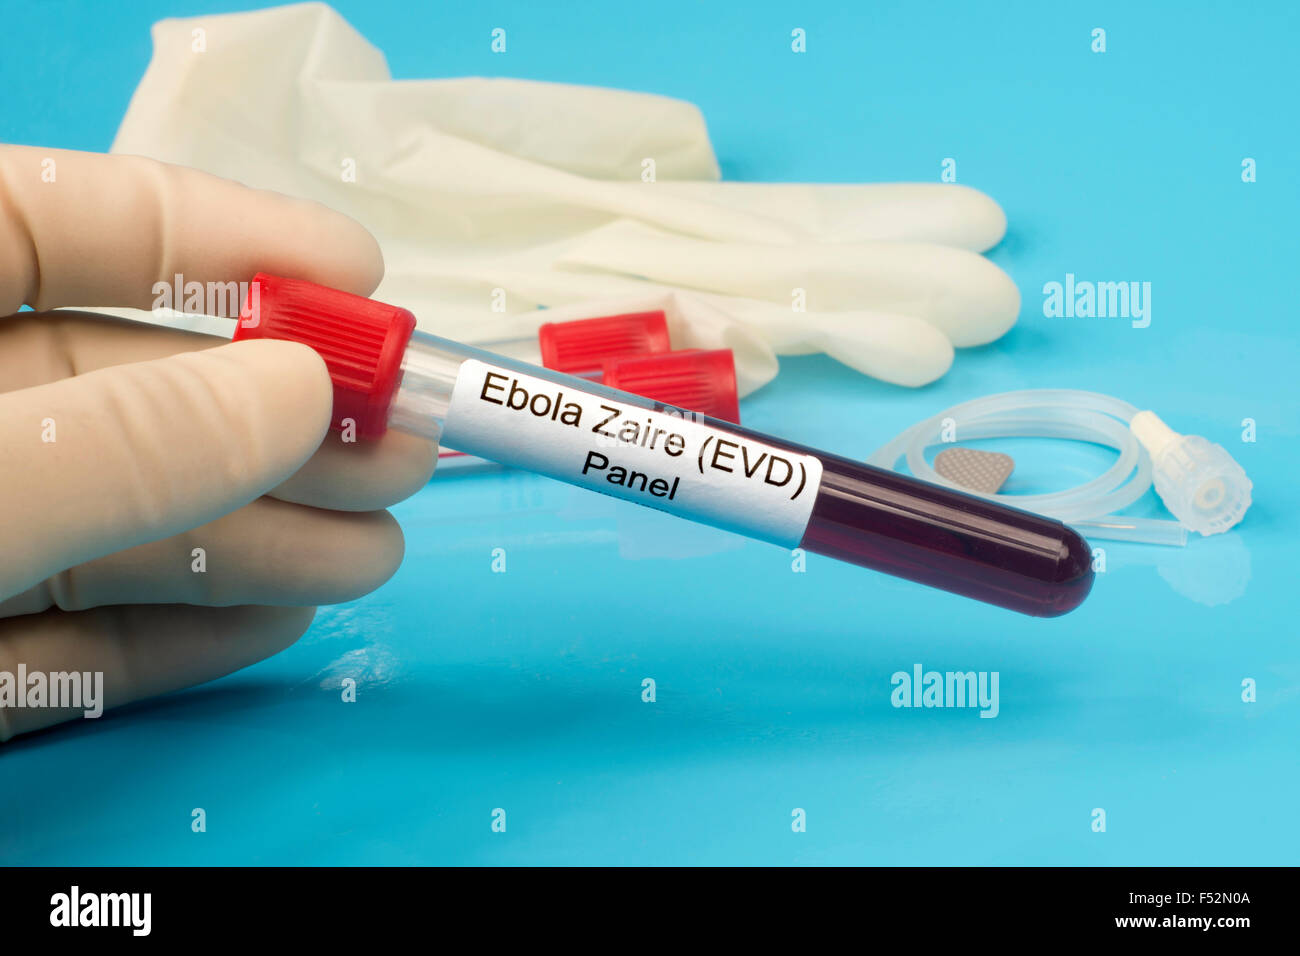 Ebola Zaire blood test panel lab sample held by lab technician. Label is fictitious. Stock Photo